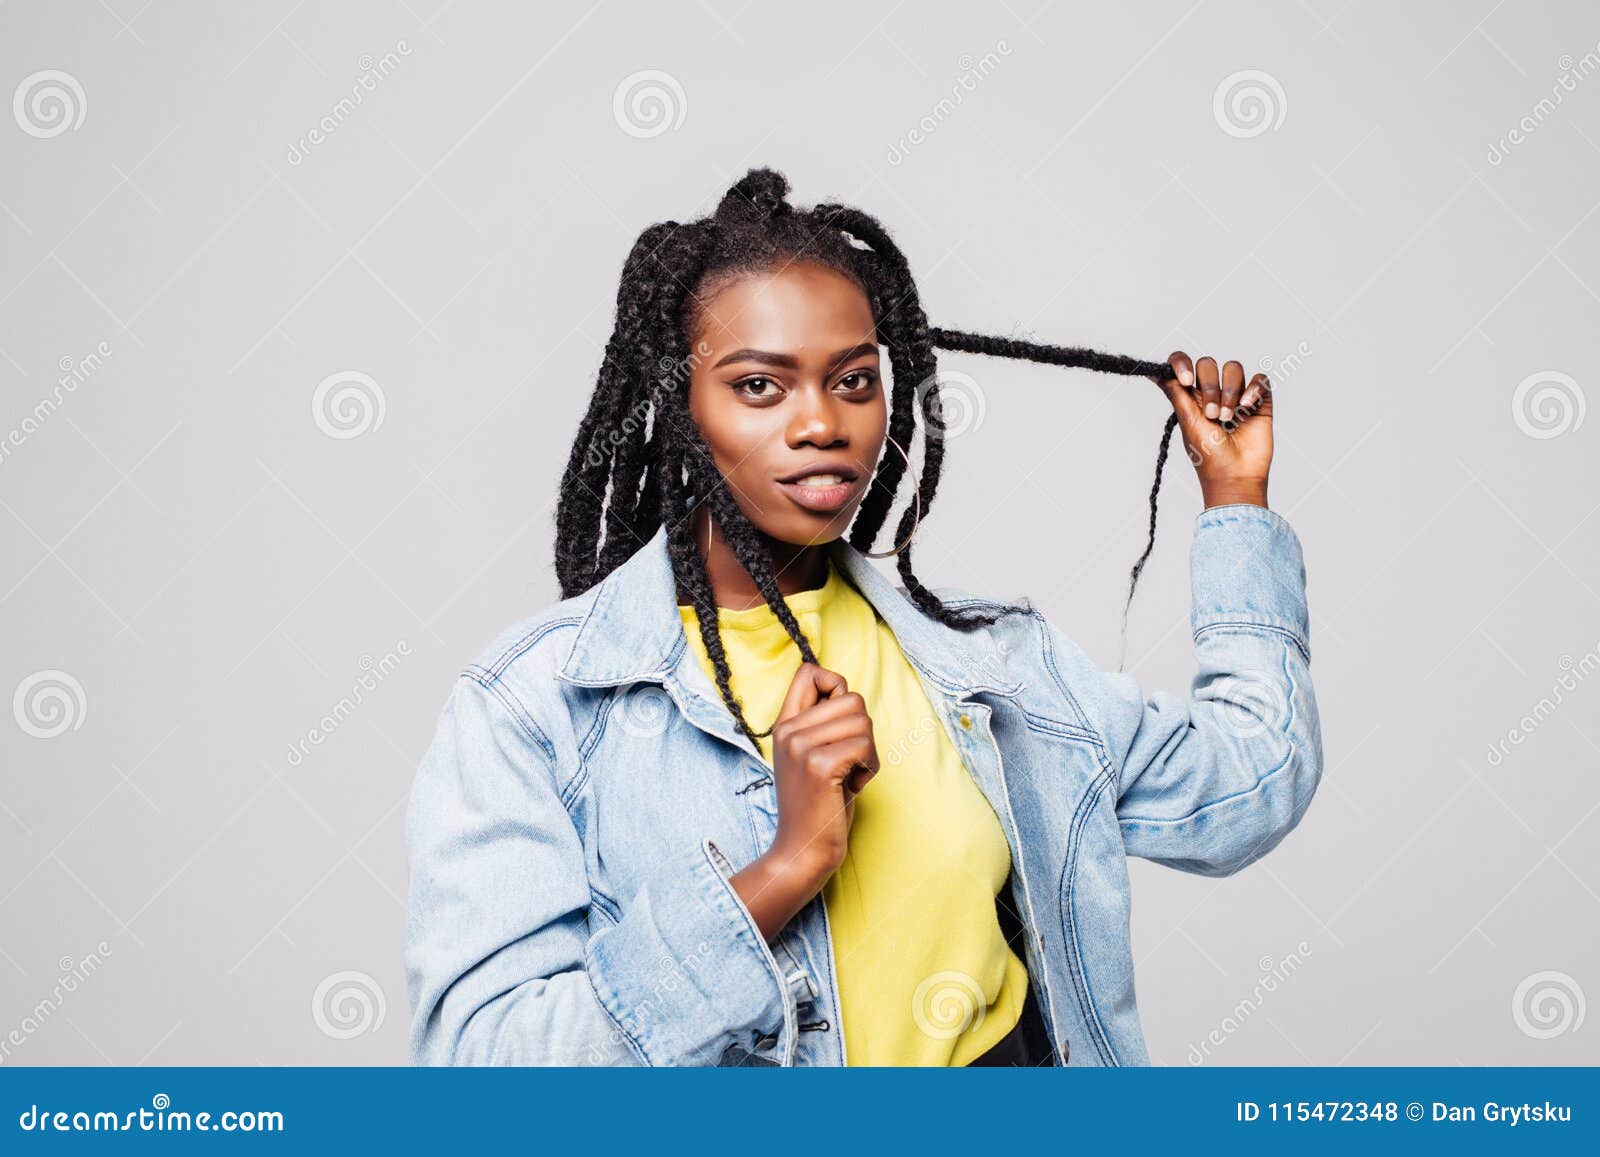 Portrait Of Woman With Hair Braided In Thin Plaits Or